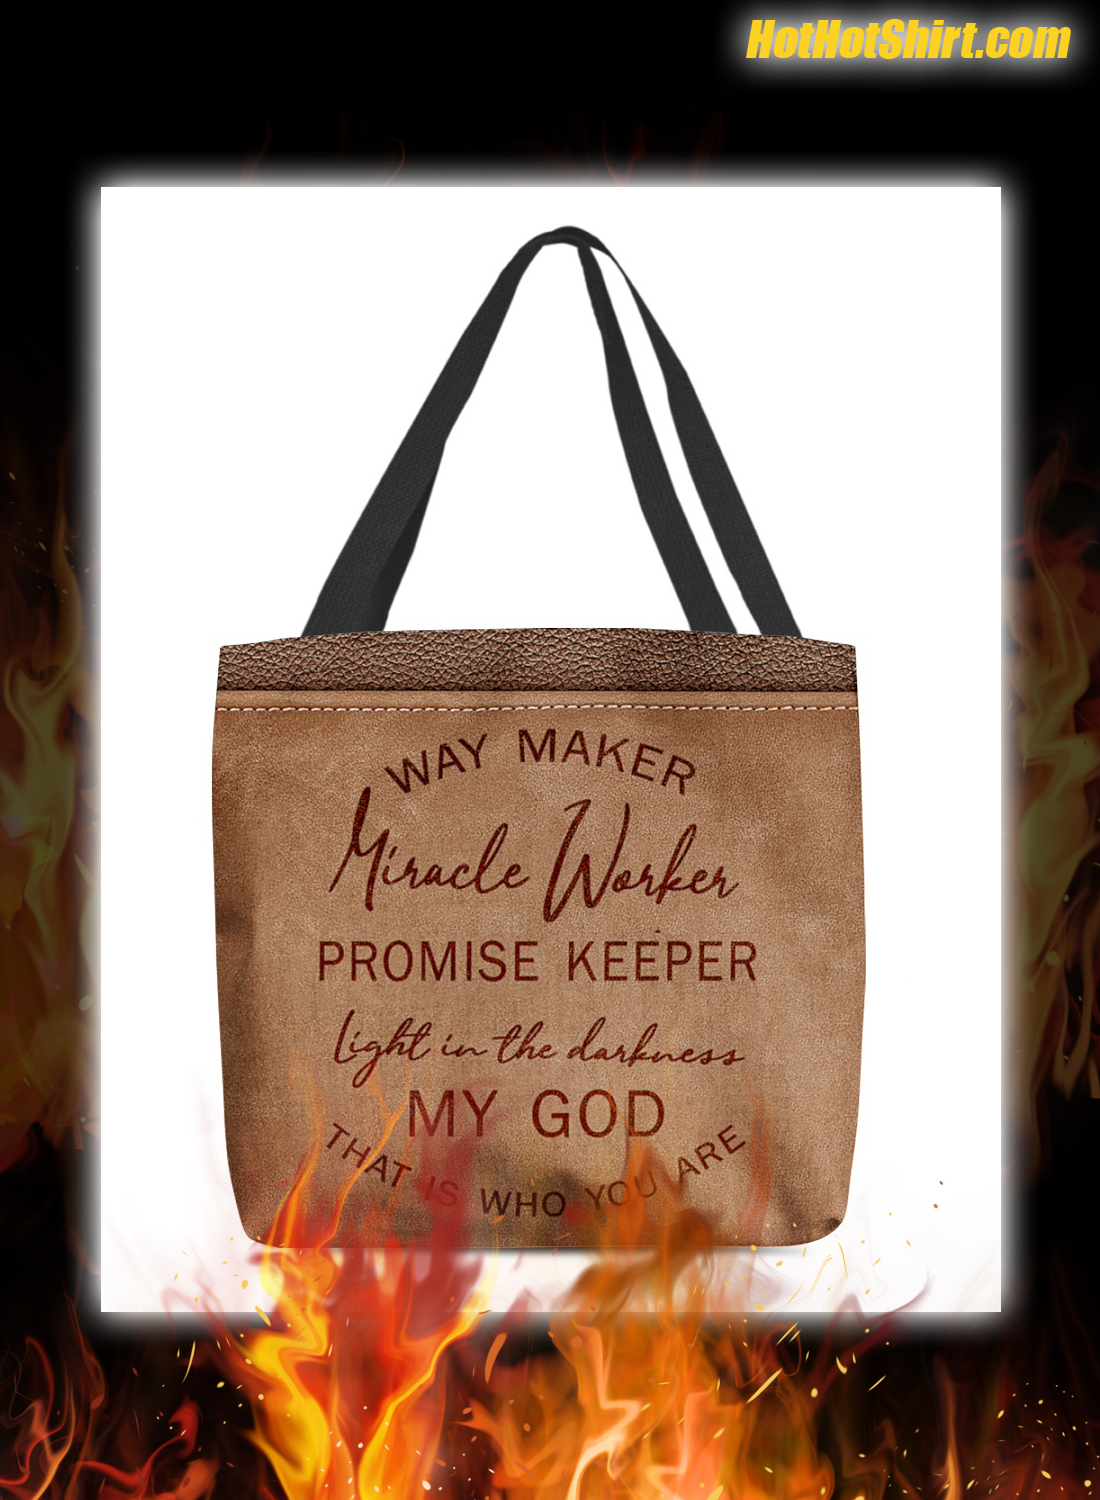 Way maker miracle worker promise keeper tote bag 1